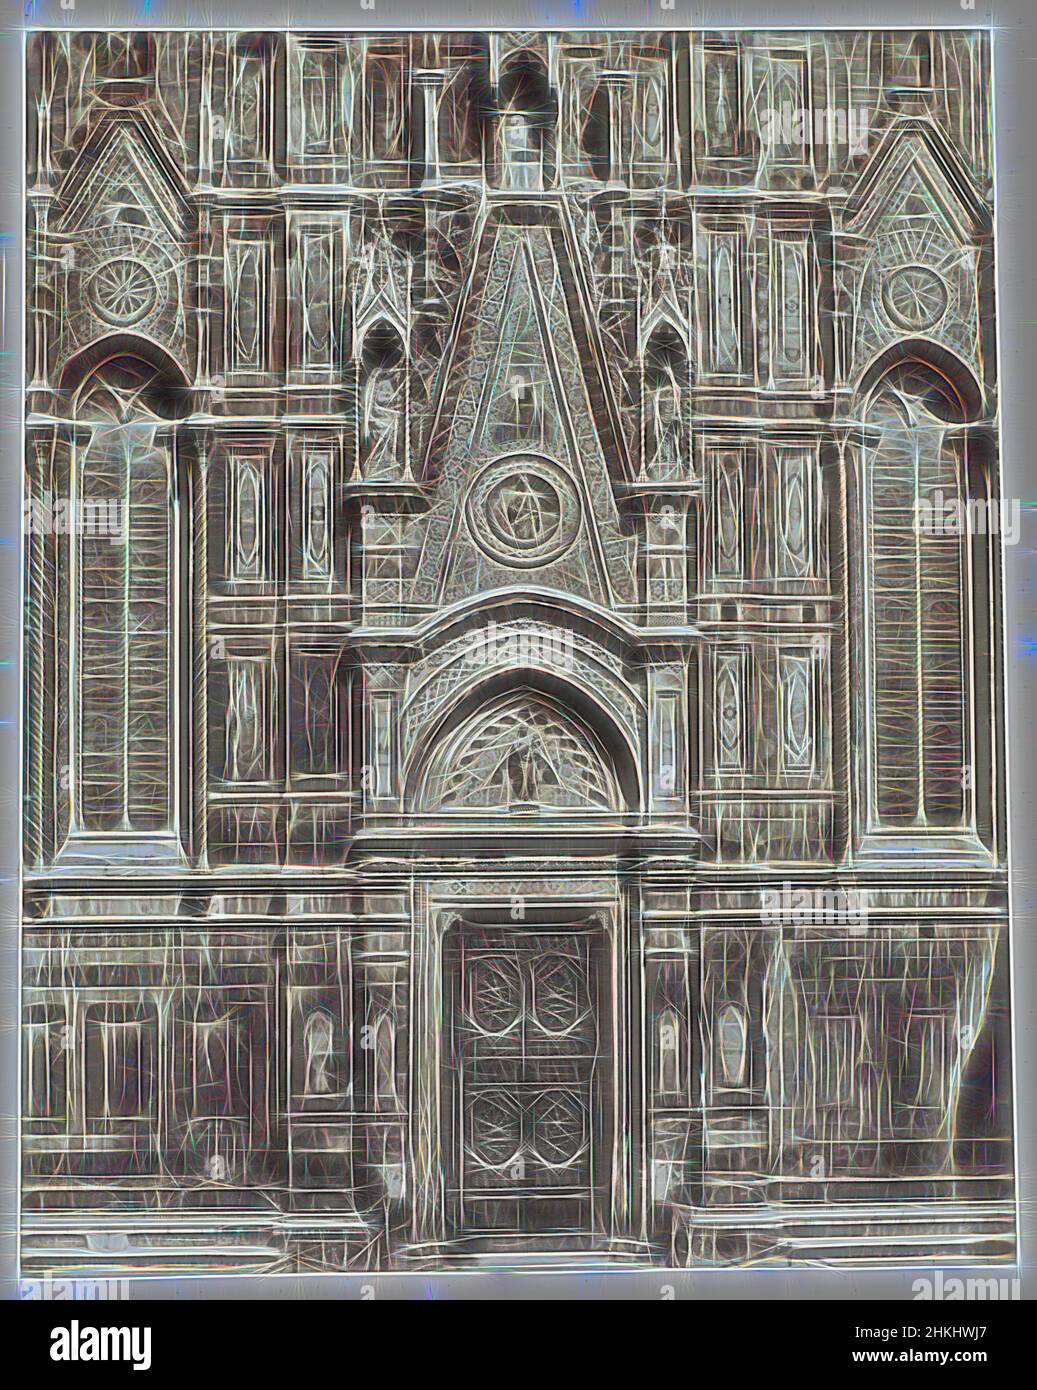 Inspired by Florence. 1st Porta Meridionale del Duomo, Fratelli Alinari, 1854 - 1855, albumen print, height 325 mm × width 263 mmheight 640 mm × width 490 mm, Reimagined by Artotop. Classic art reinvented with a modern twist. Design of warm cheerful glowing of brightness and light ray radiance. Photography inspired by surrealism and futurism, embracing dynamic energy of modern technology, movement, speed and revolutionize culture Stock Photo